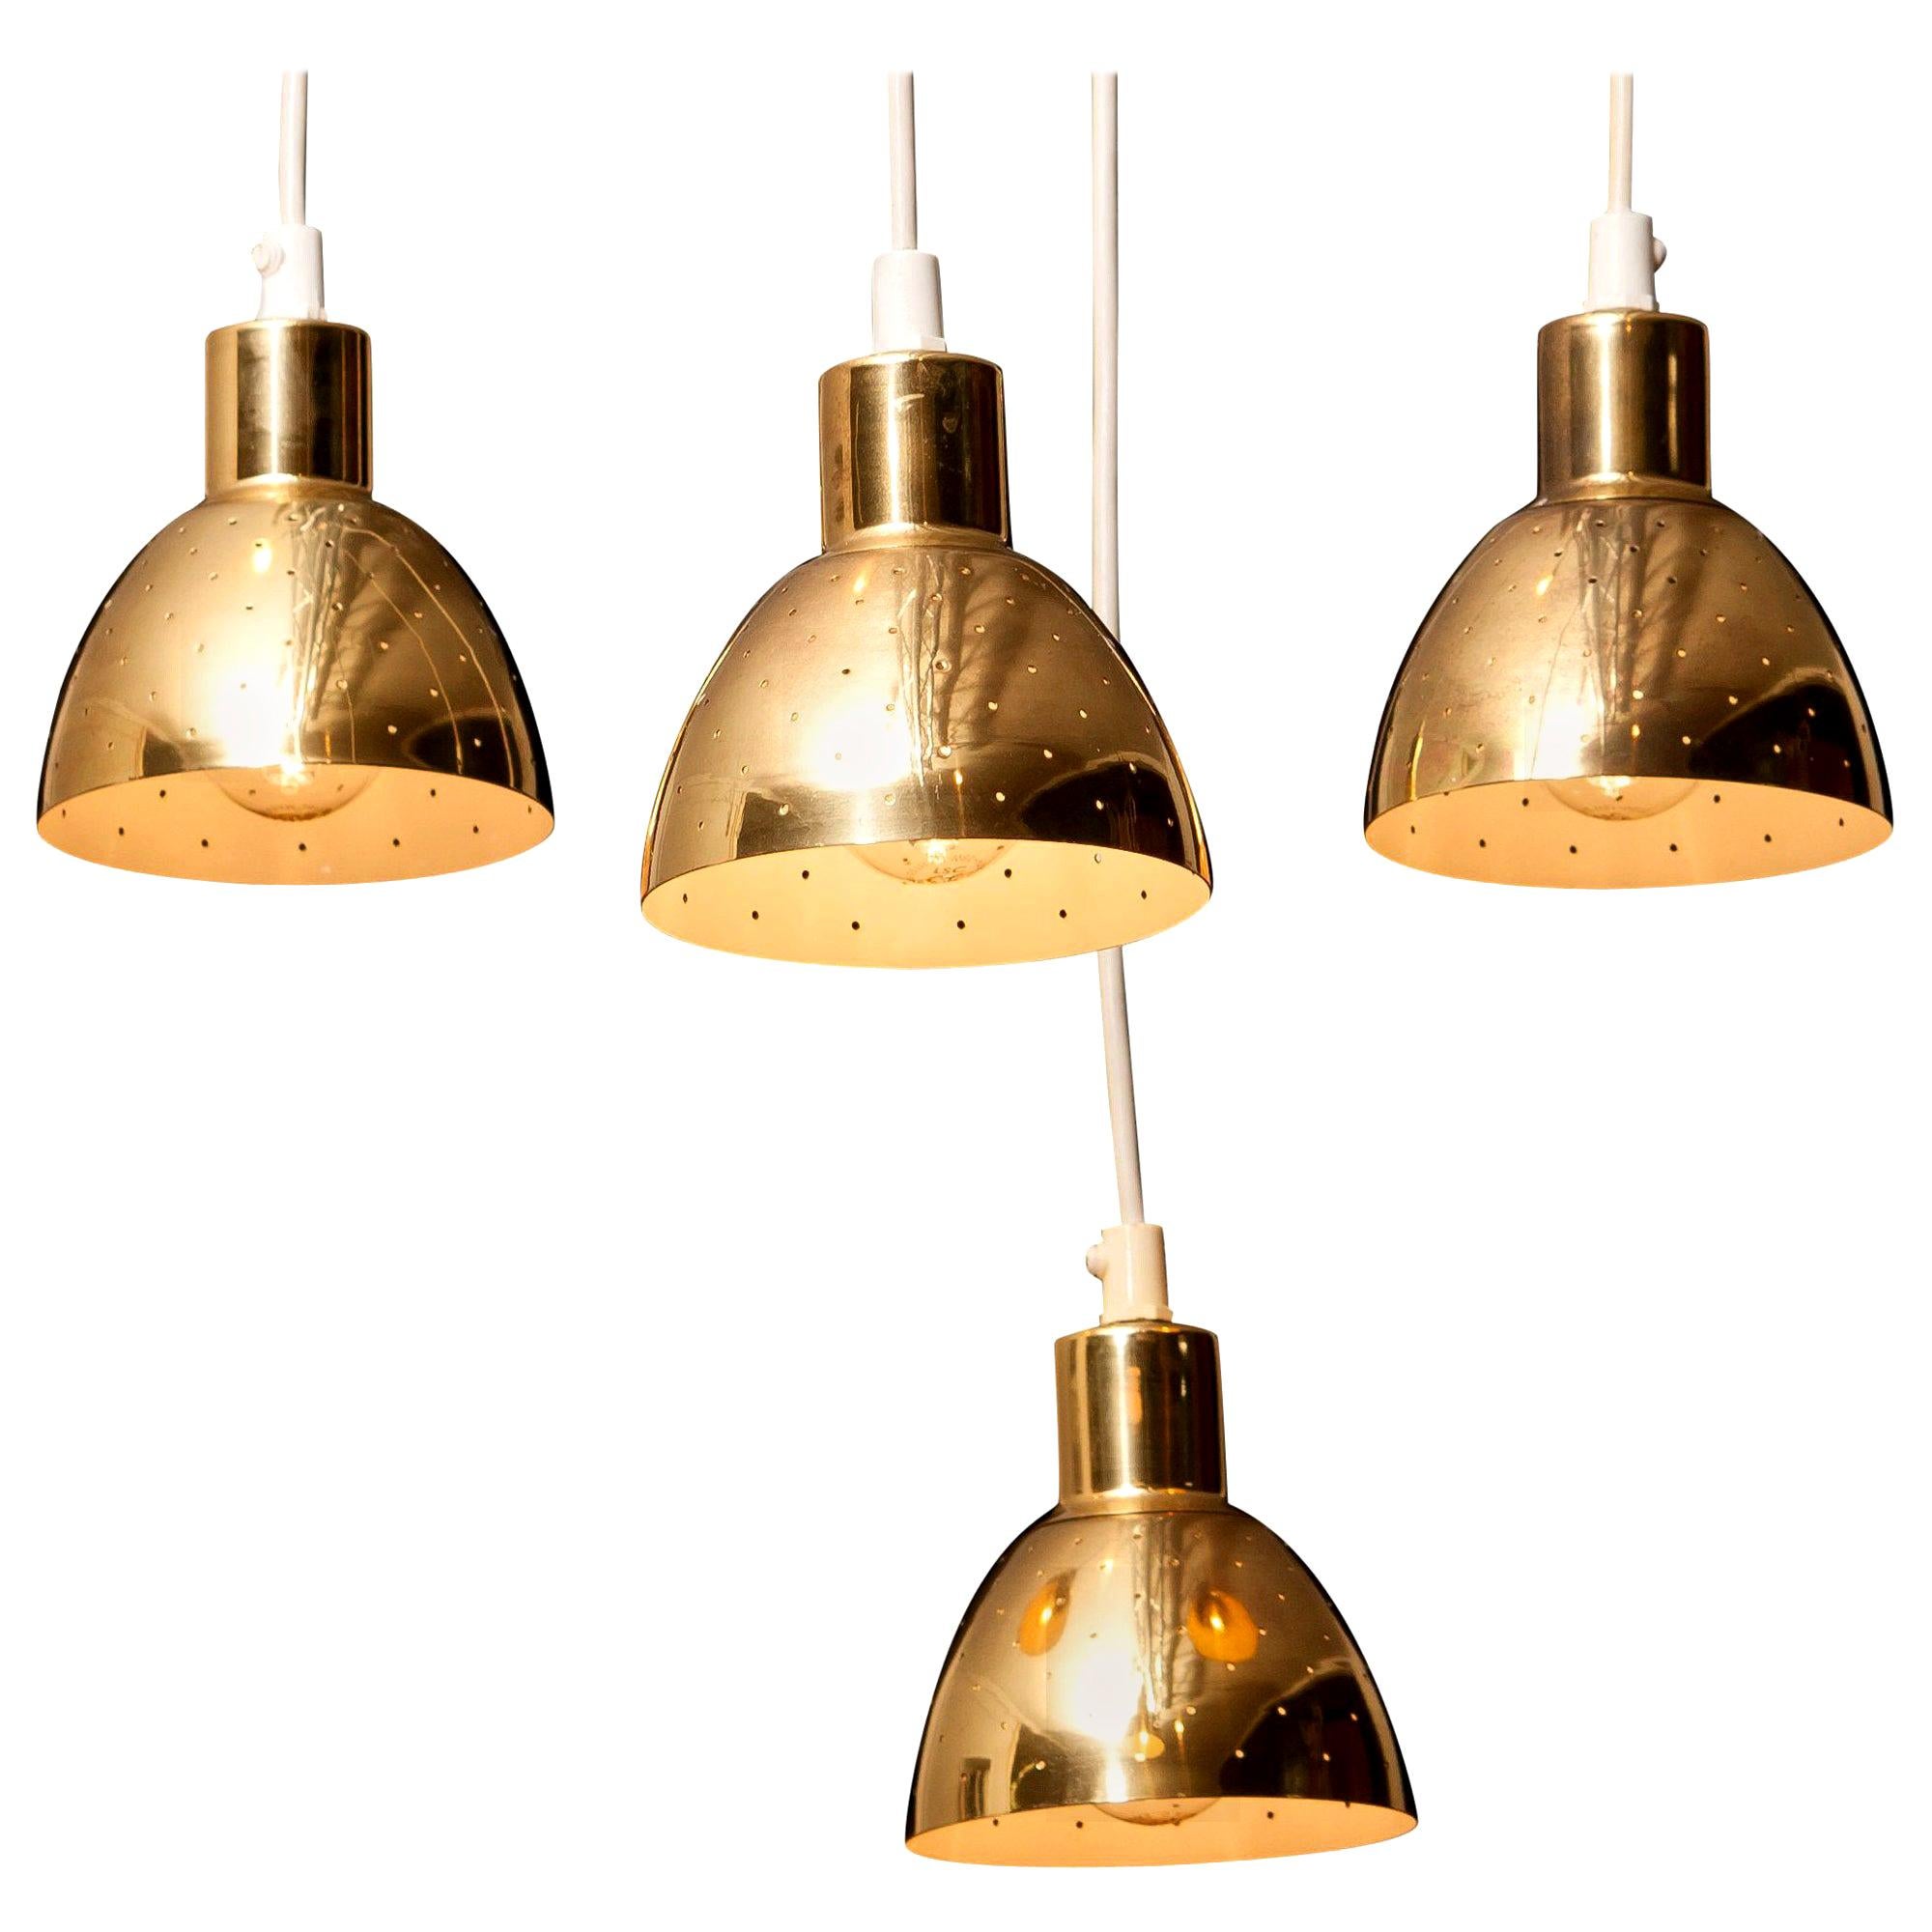 Great set of four brass pendants by Hans-Agne Jakobsson for Markaryd, Sweden.
Each lamp has perforation with gives the light a beautiful shining.
They are in a good and working condition.
Period: 1960s.
Dimensions: H 11 cm, Ø 11 cm.